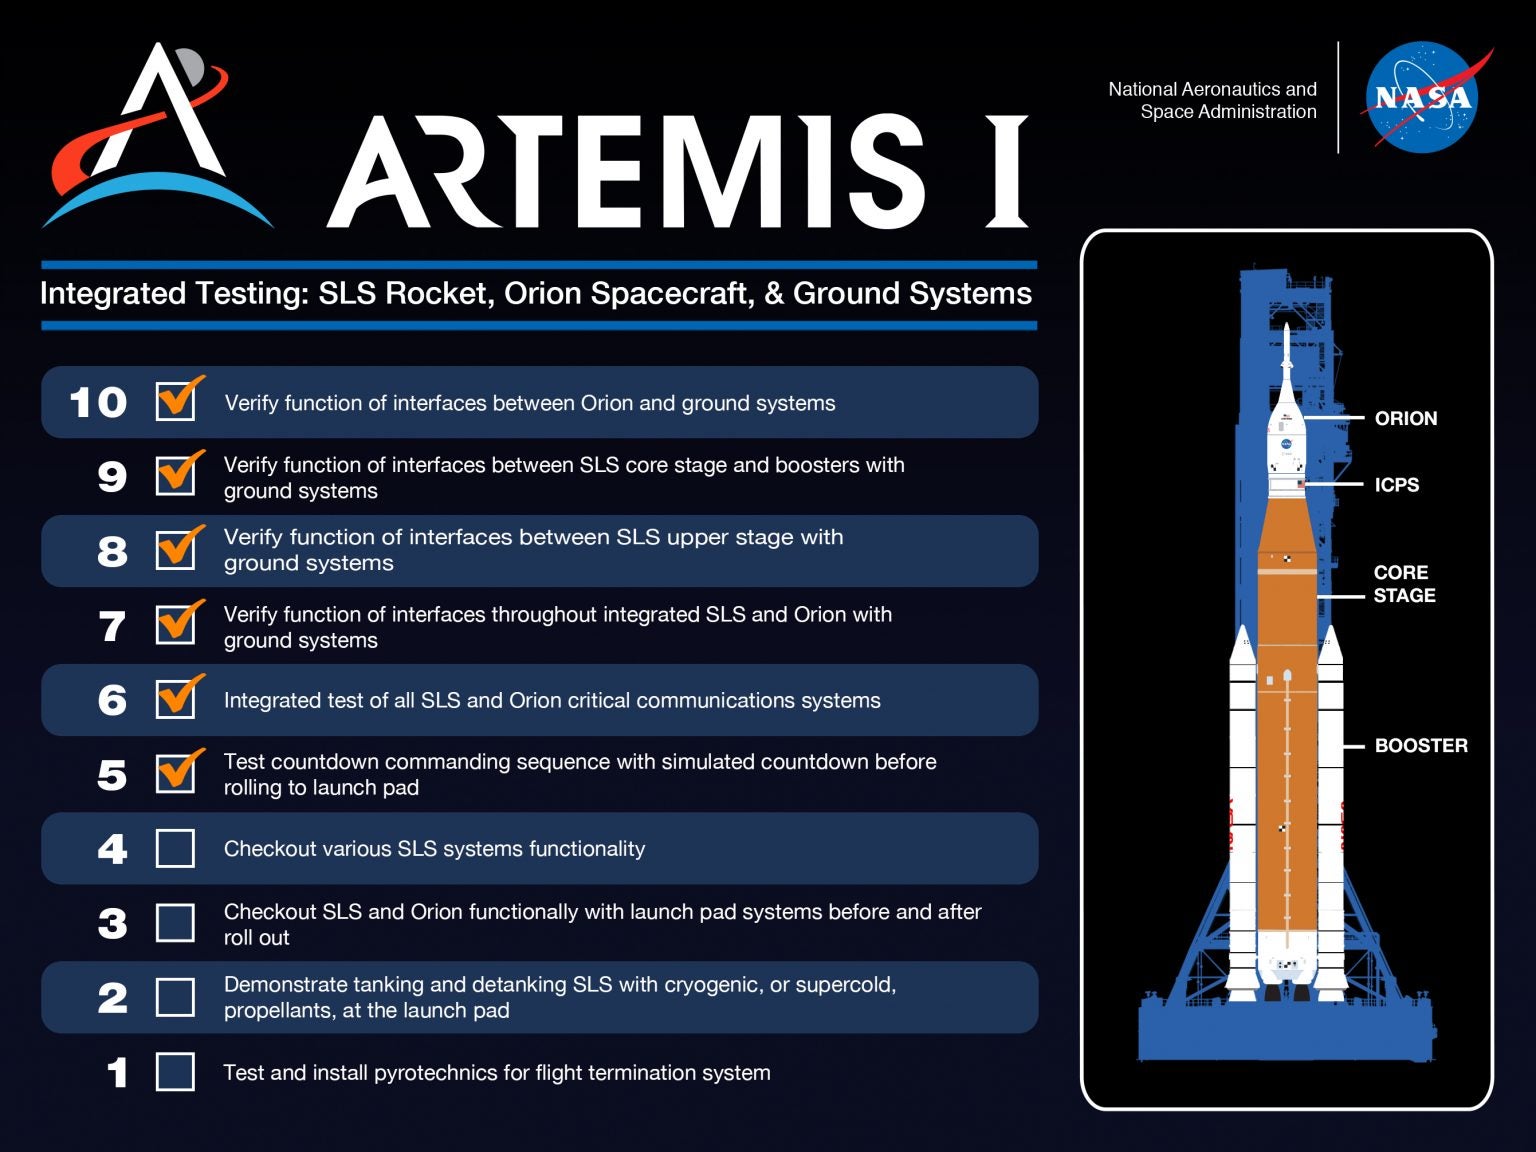 A graphic showing both completed and outstanding items on the Artemis I to-do list. (Graphic: NASA)